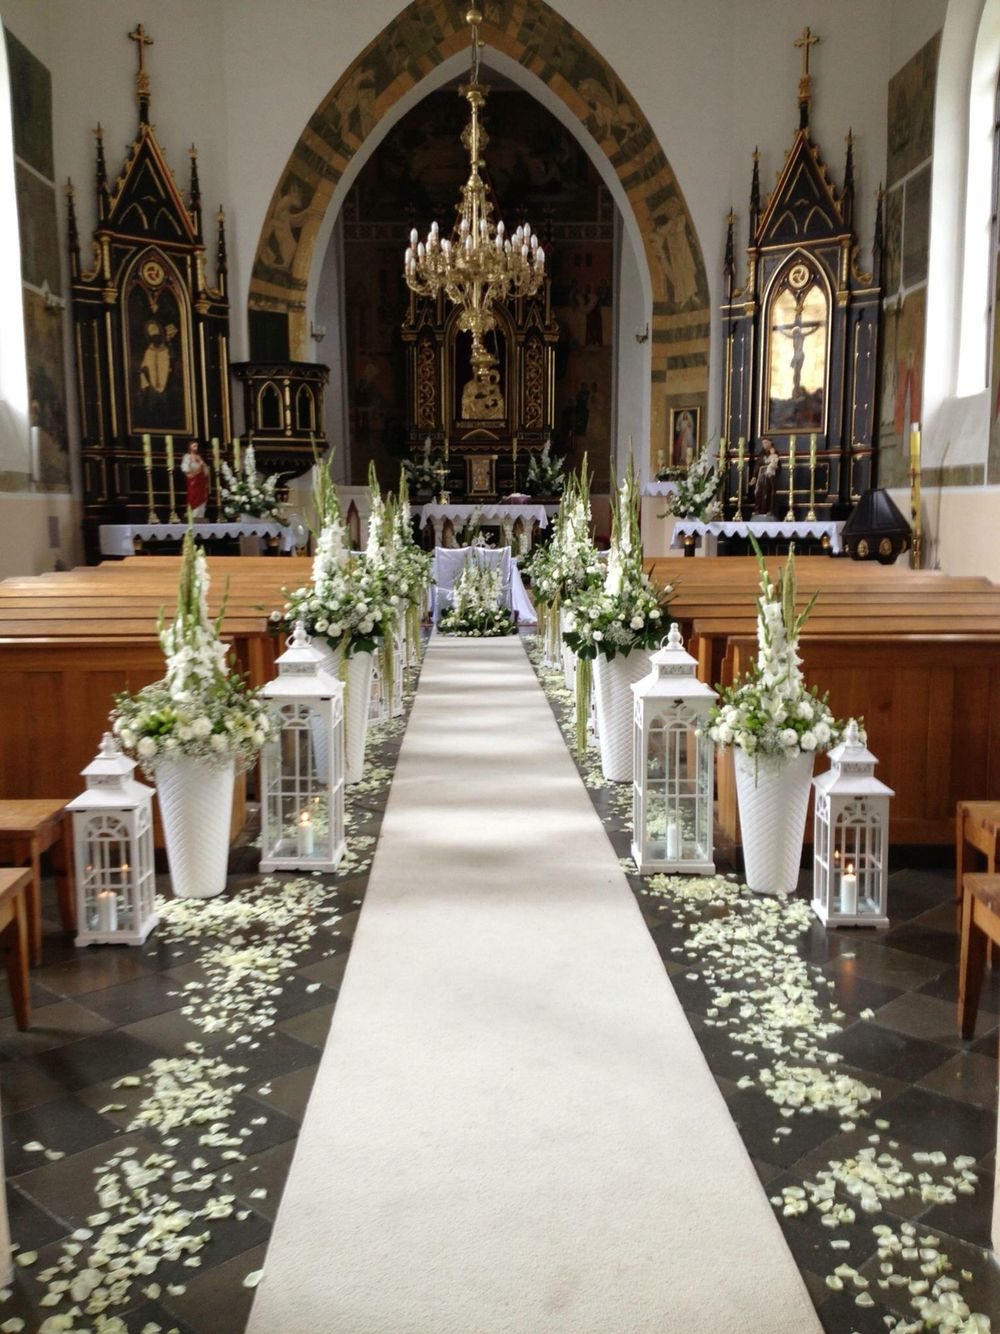 Church Decorations For Weddings
 Follow us SIGNATUREBRIDE on Twitter and on FACEBOOK